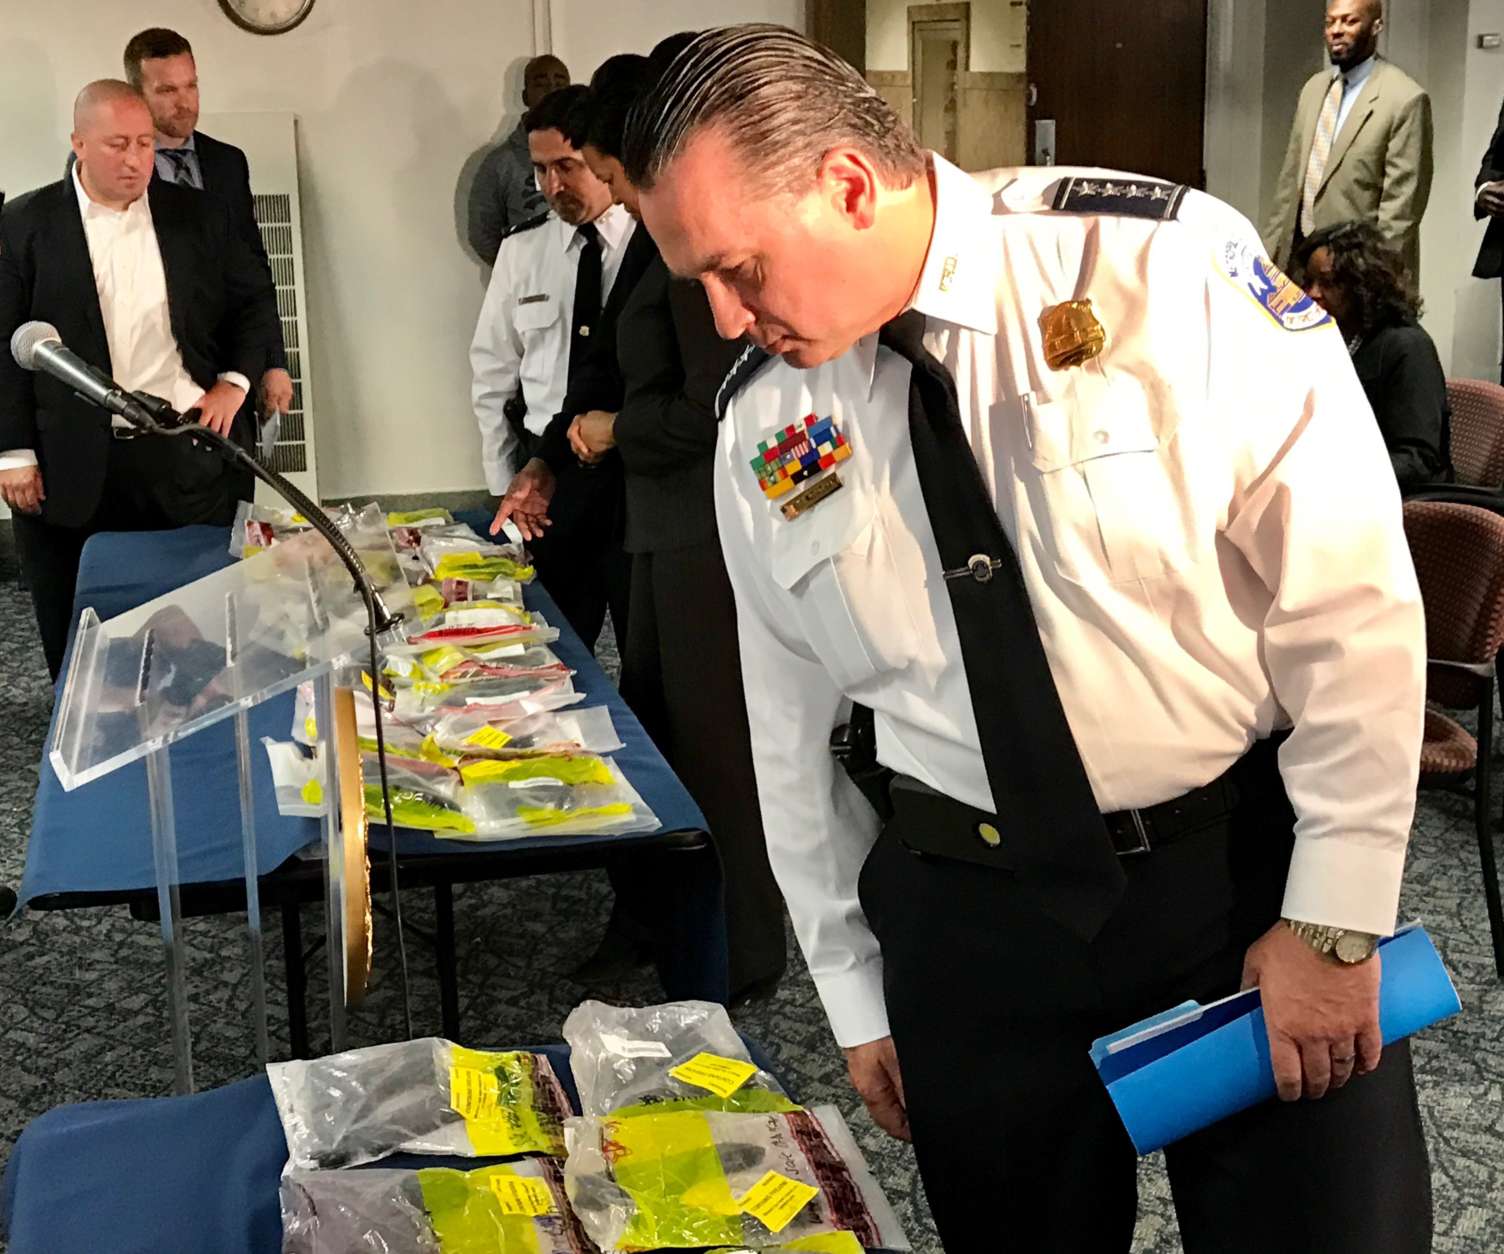 D.C. Police Chief Peter Newsham surveys the illegal firearms pulled off the streets and packaged in evidence bags after a press conference May 10, 2017. (WTOP/Megan Cloherty)